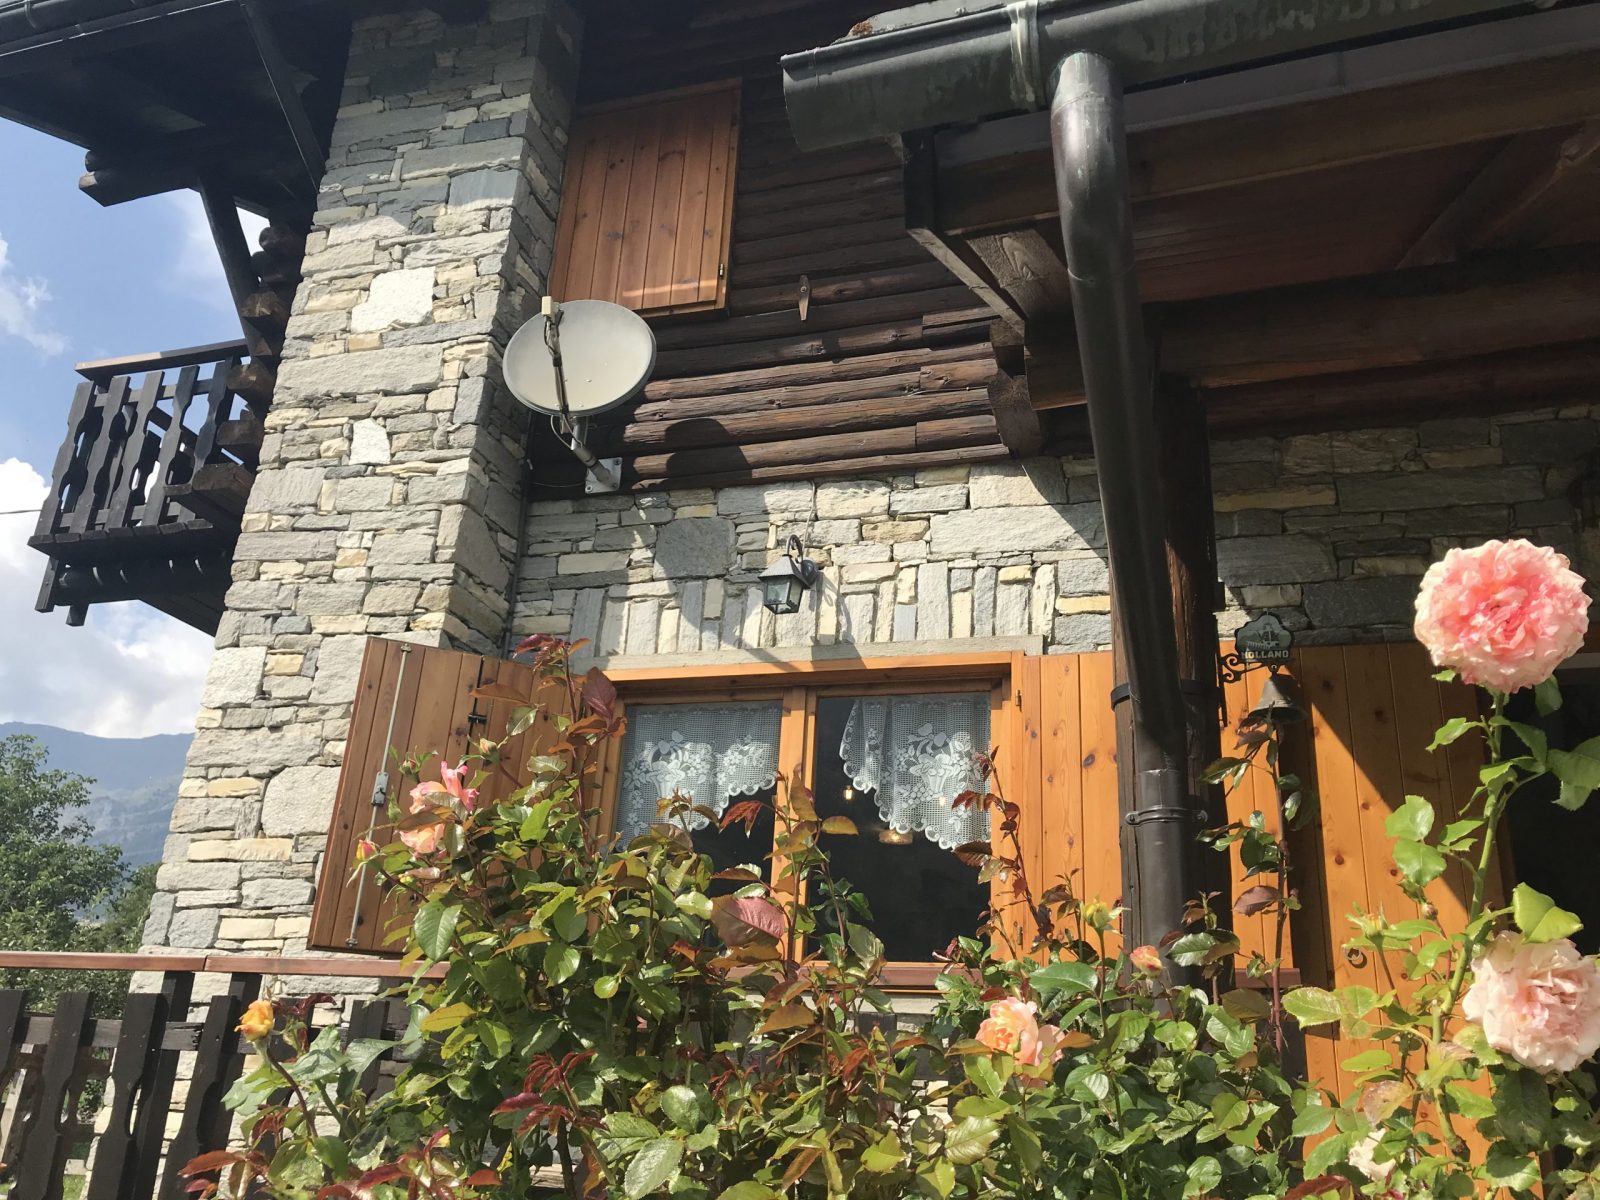 The semi-detached house in Chabodey. My experience of buying a home in the Italian Alps.